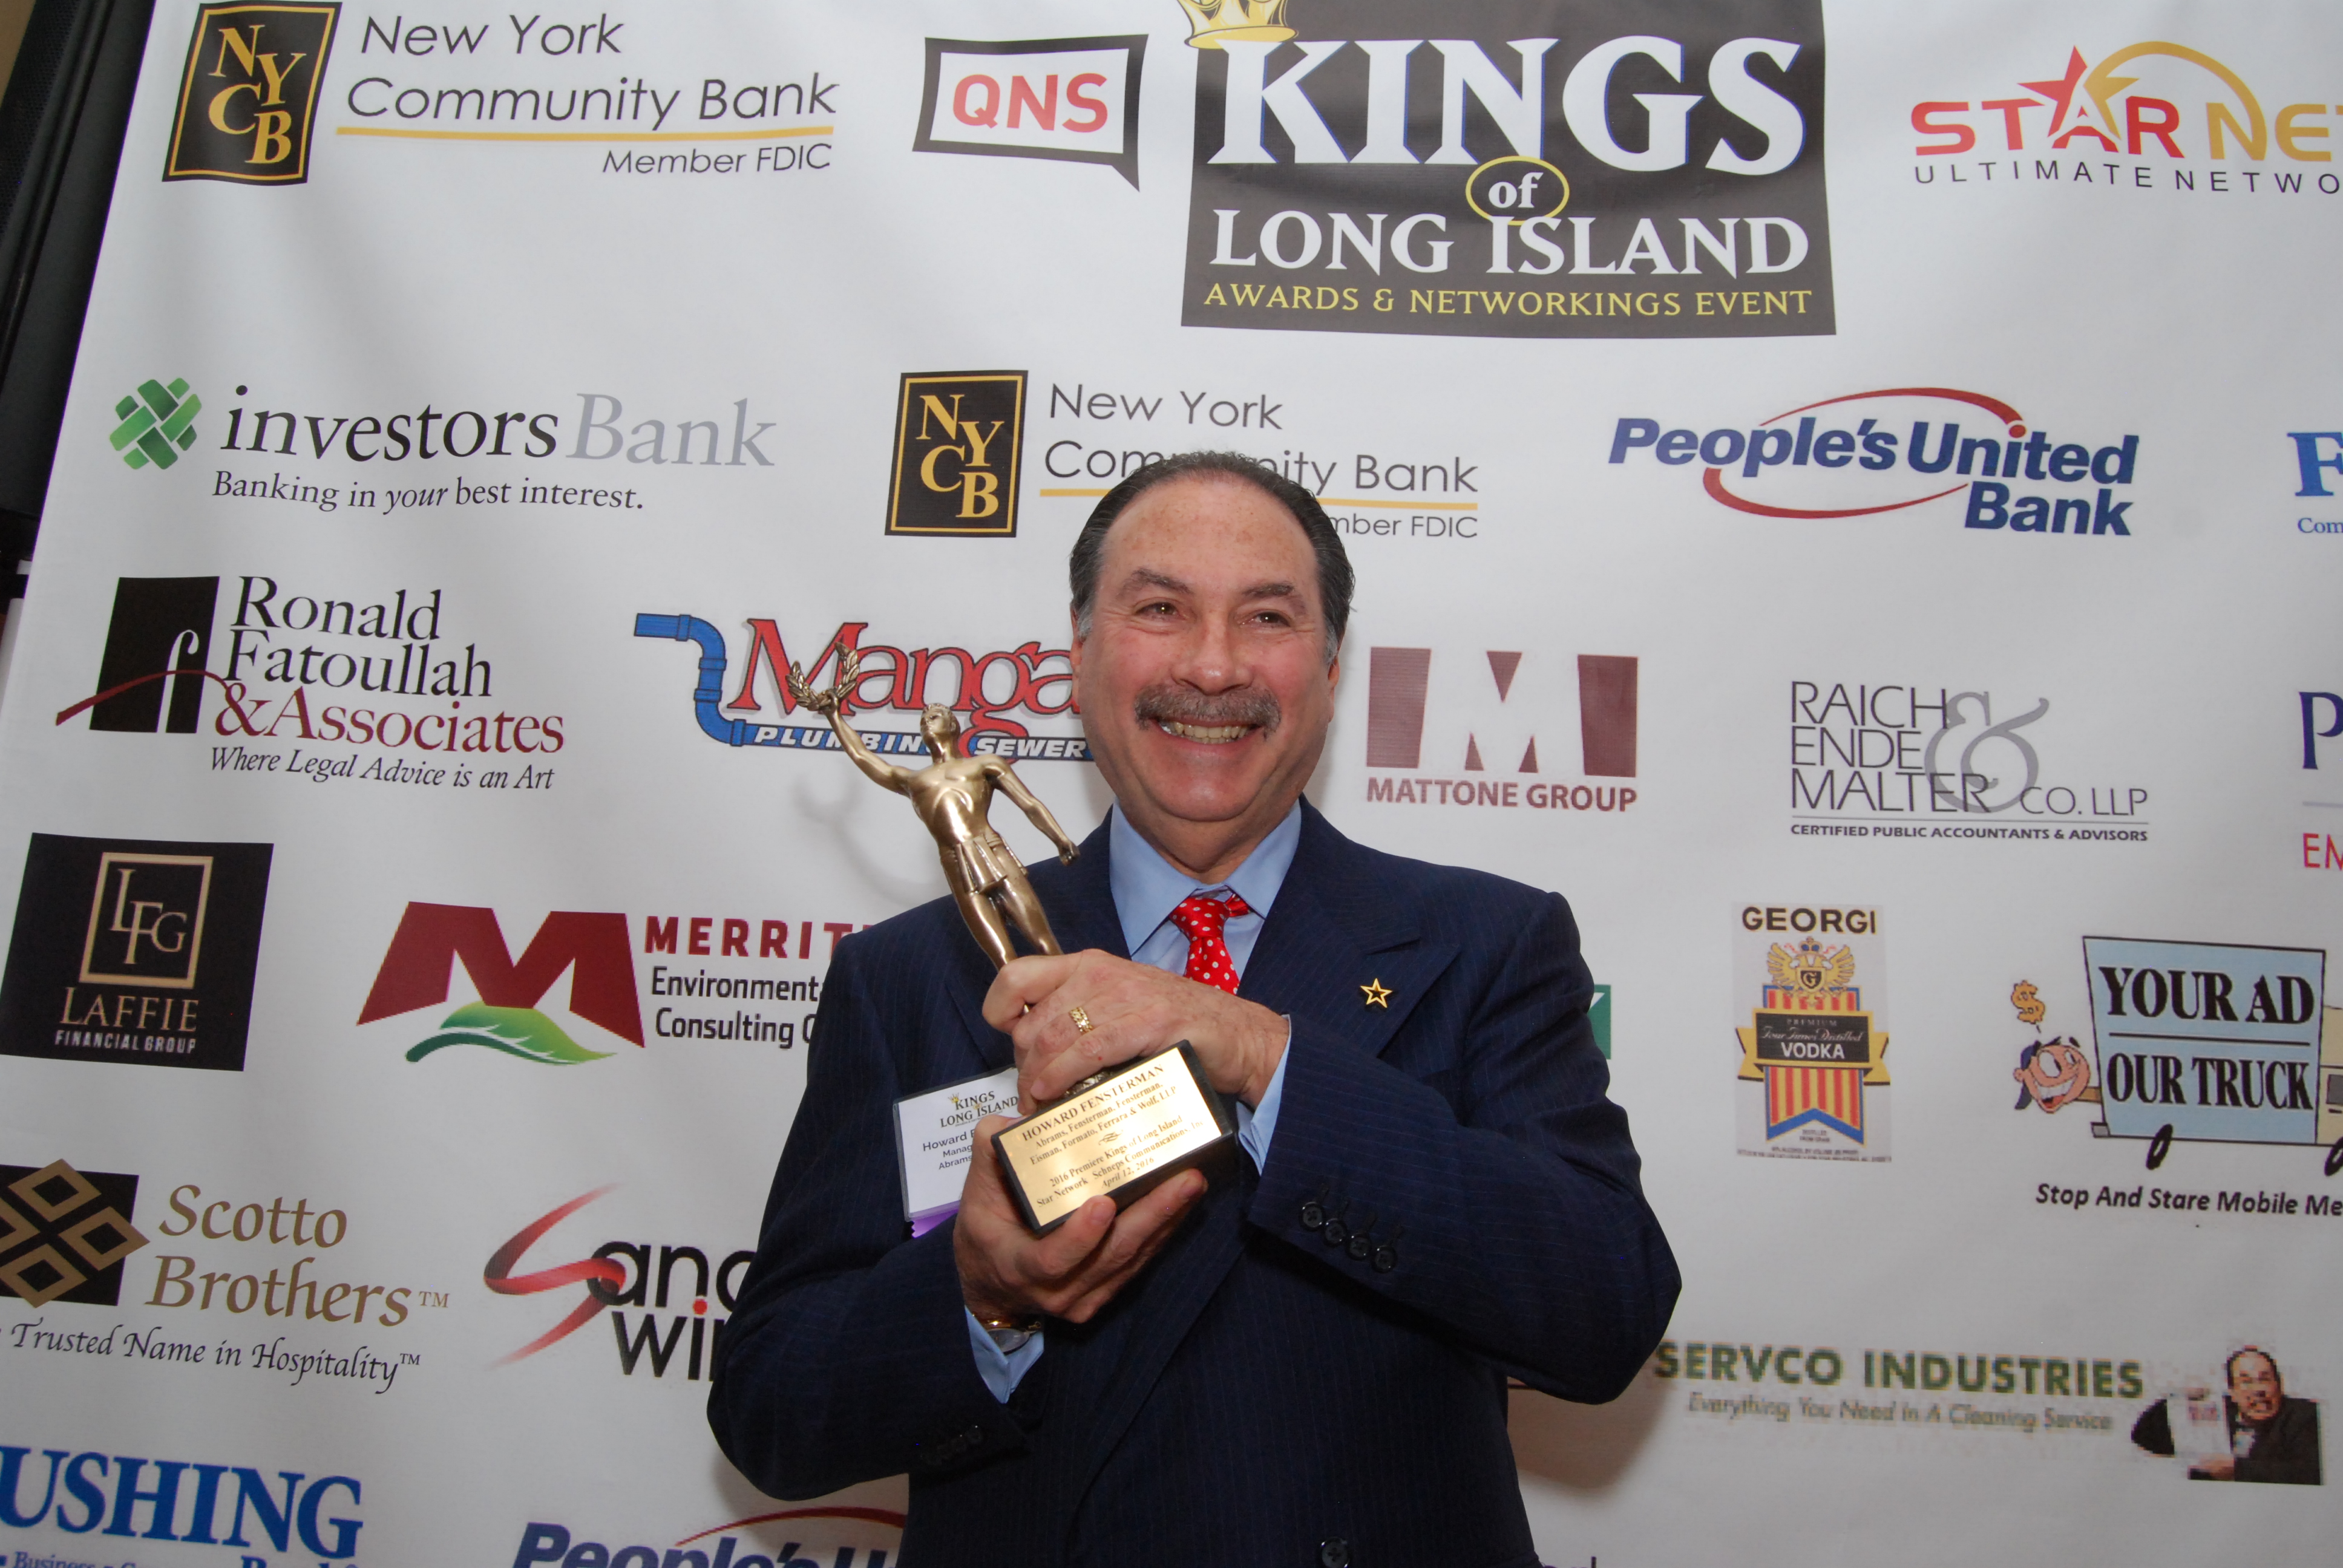 Howard Fensterman was honored at the Kings of Long Island business networking event.